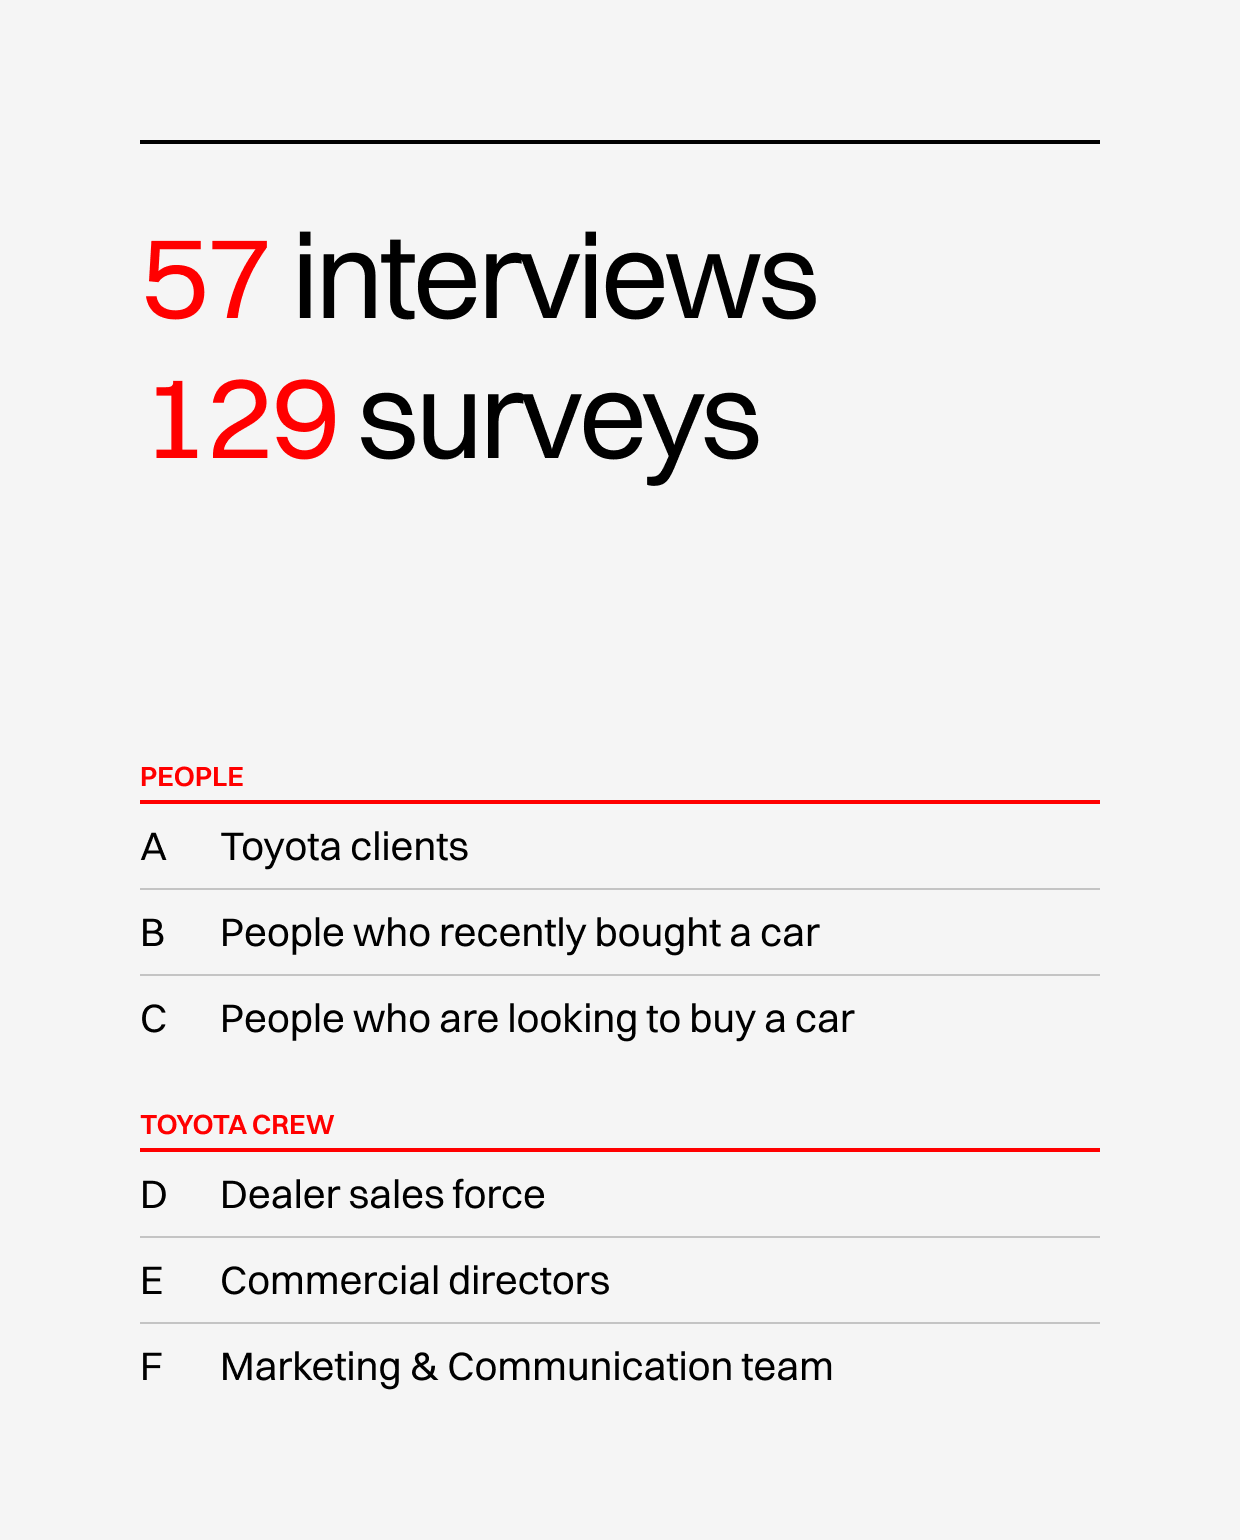 We did 57 interviews and 129 surveys to Toyota Clients, people who recently bought a car, people who are looking to buy a car and the Toyota crew as dealer sales force, Commercial directors and Marketing & Communication team